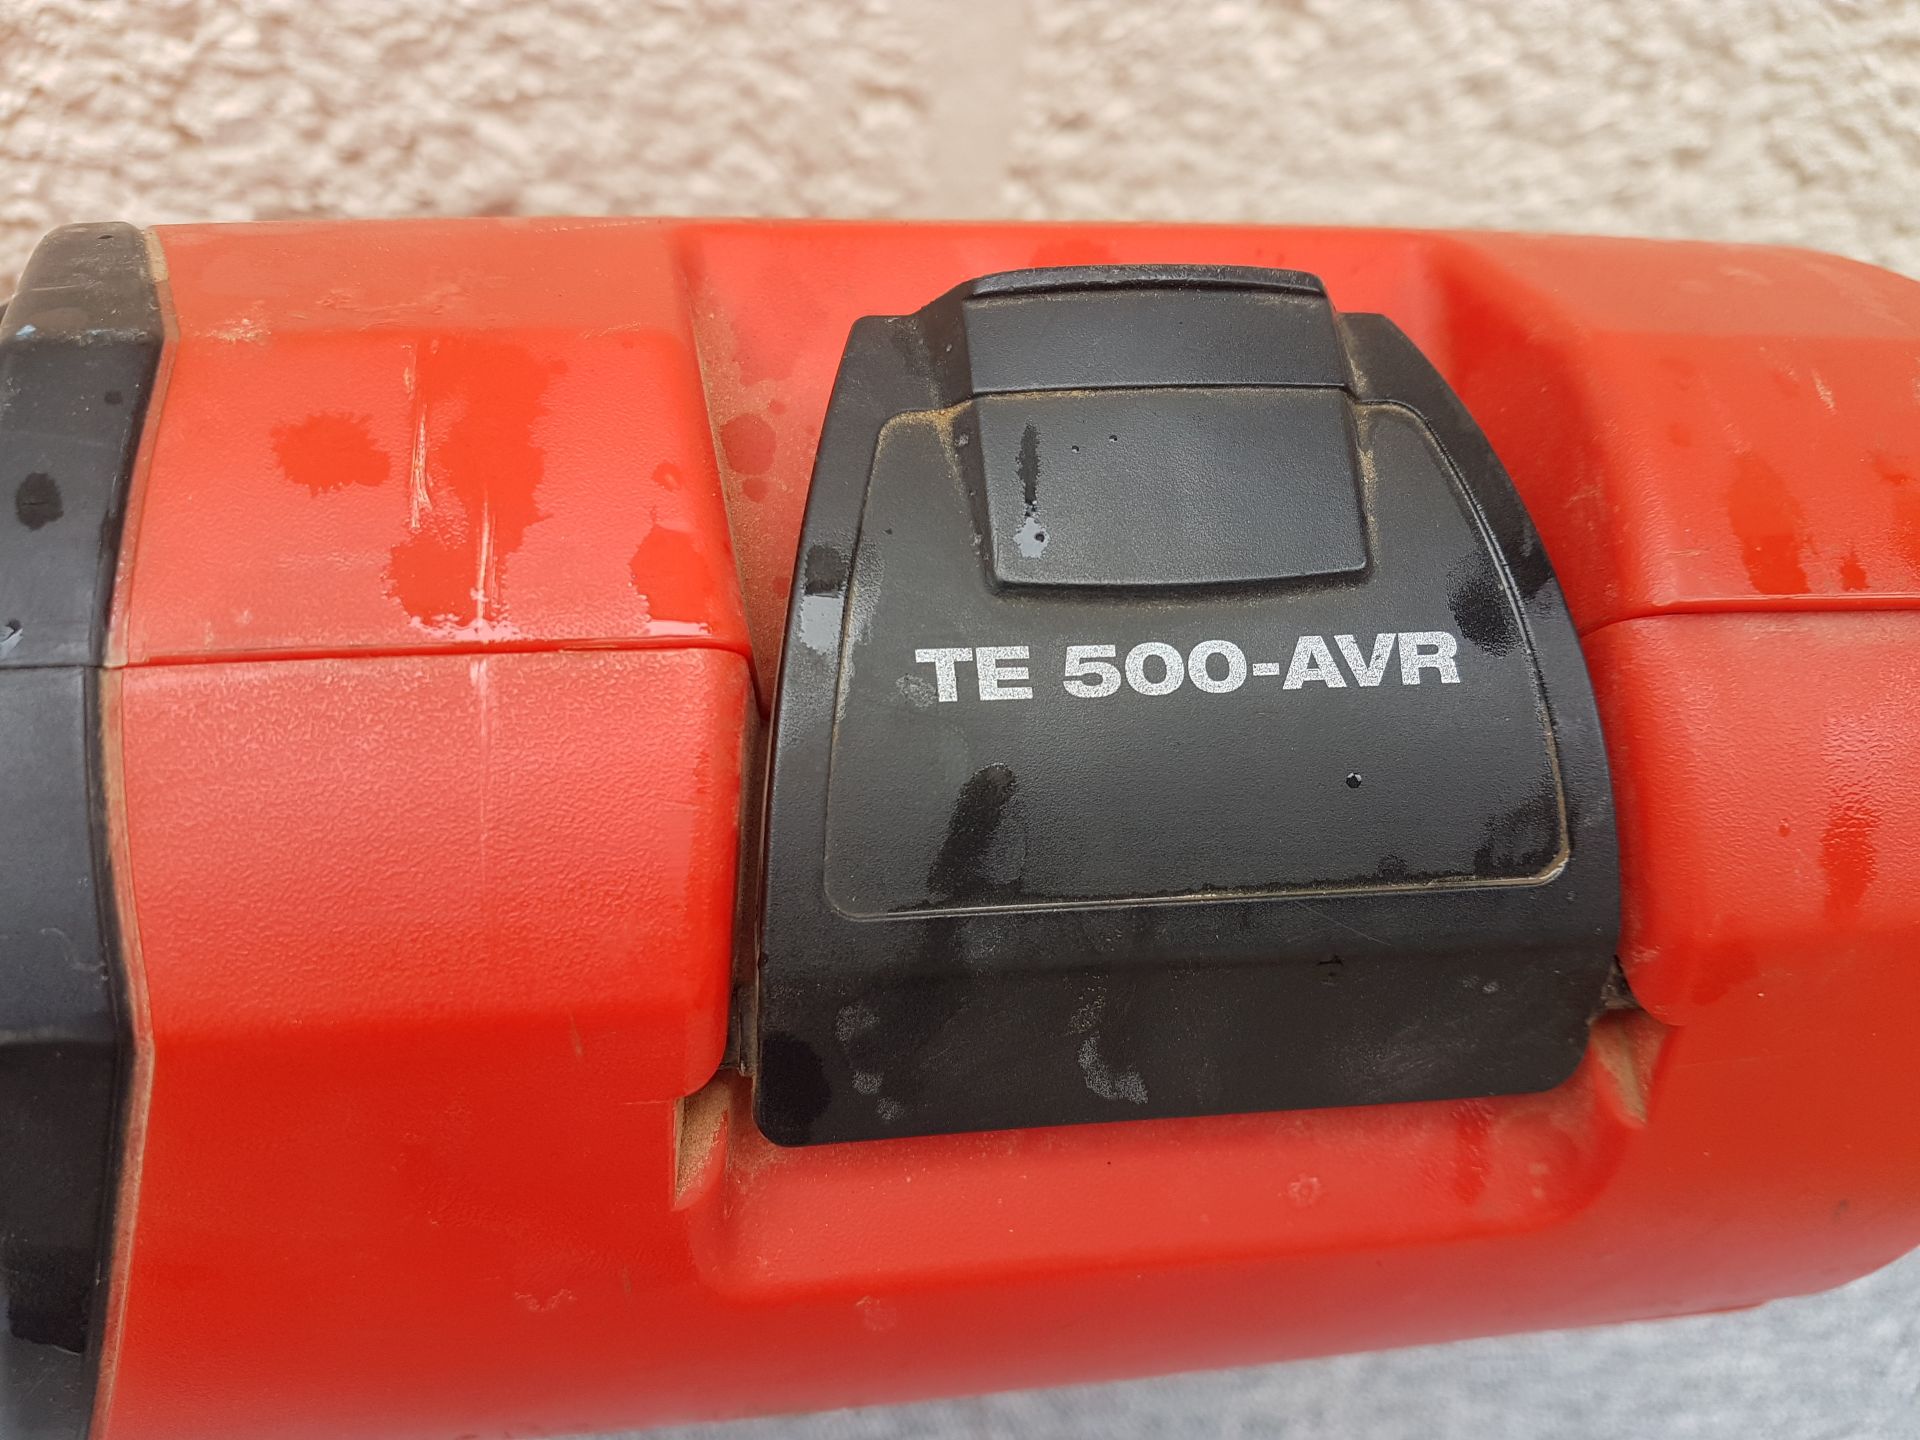 Hilti TE 500 AVR SDS Lightweight Breaker with Chisel 110v in Box - Tested / In Working Order - Image 2 of 2